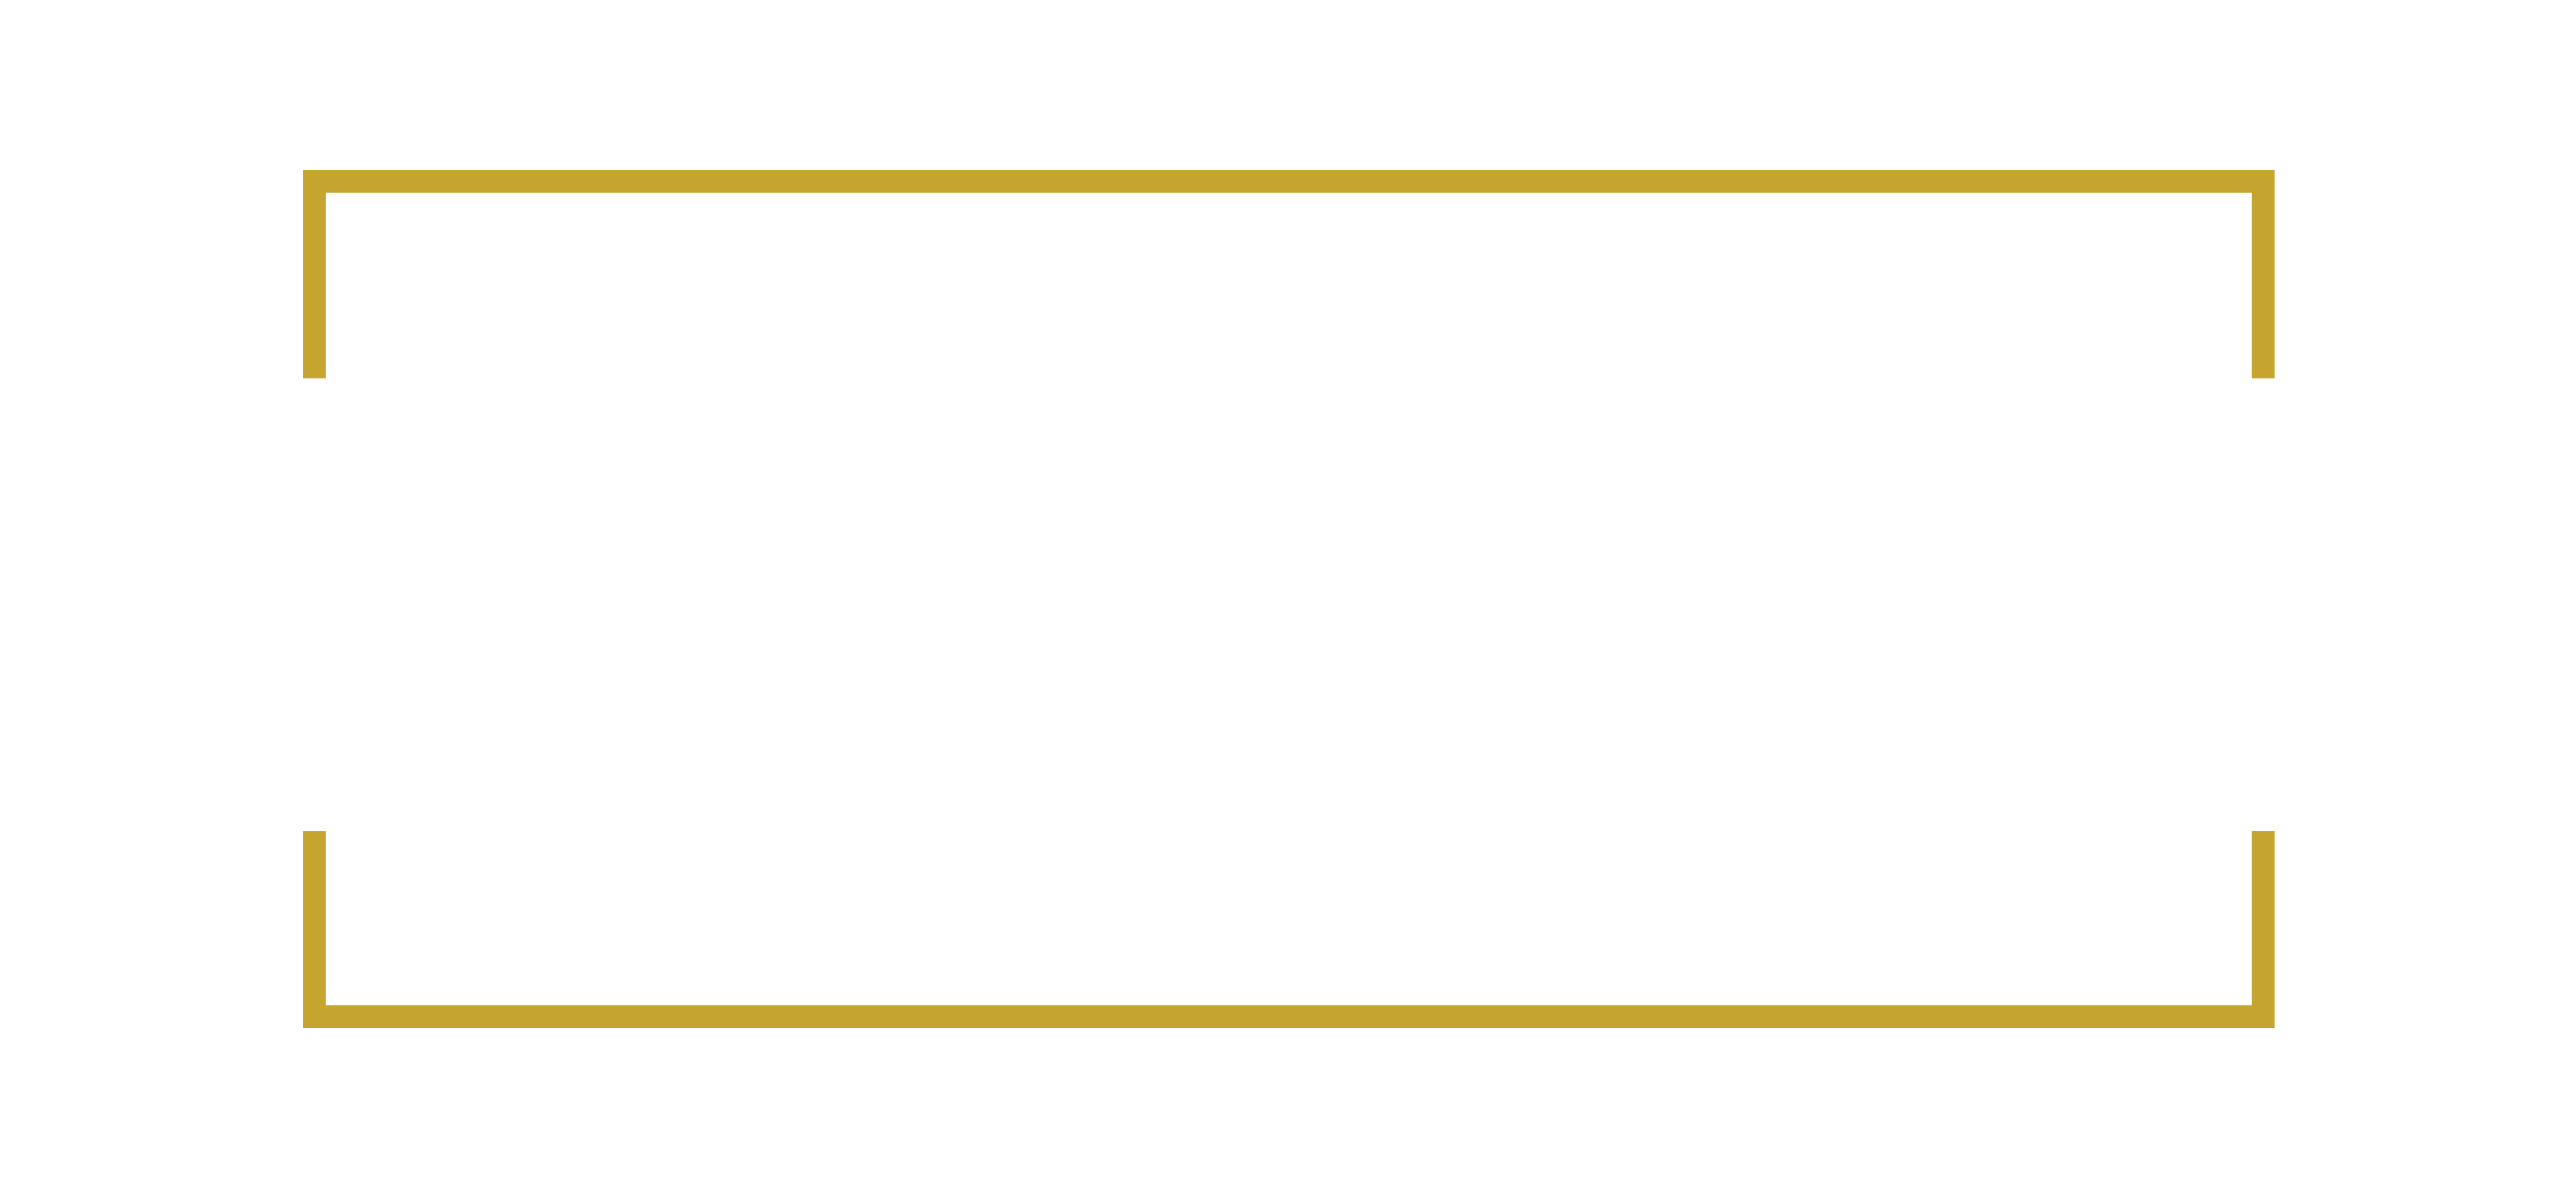 Free Your Mind - Marriage & Family Therapy